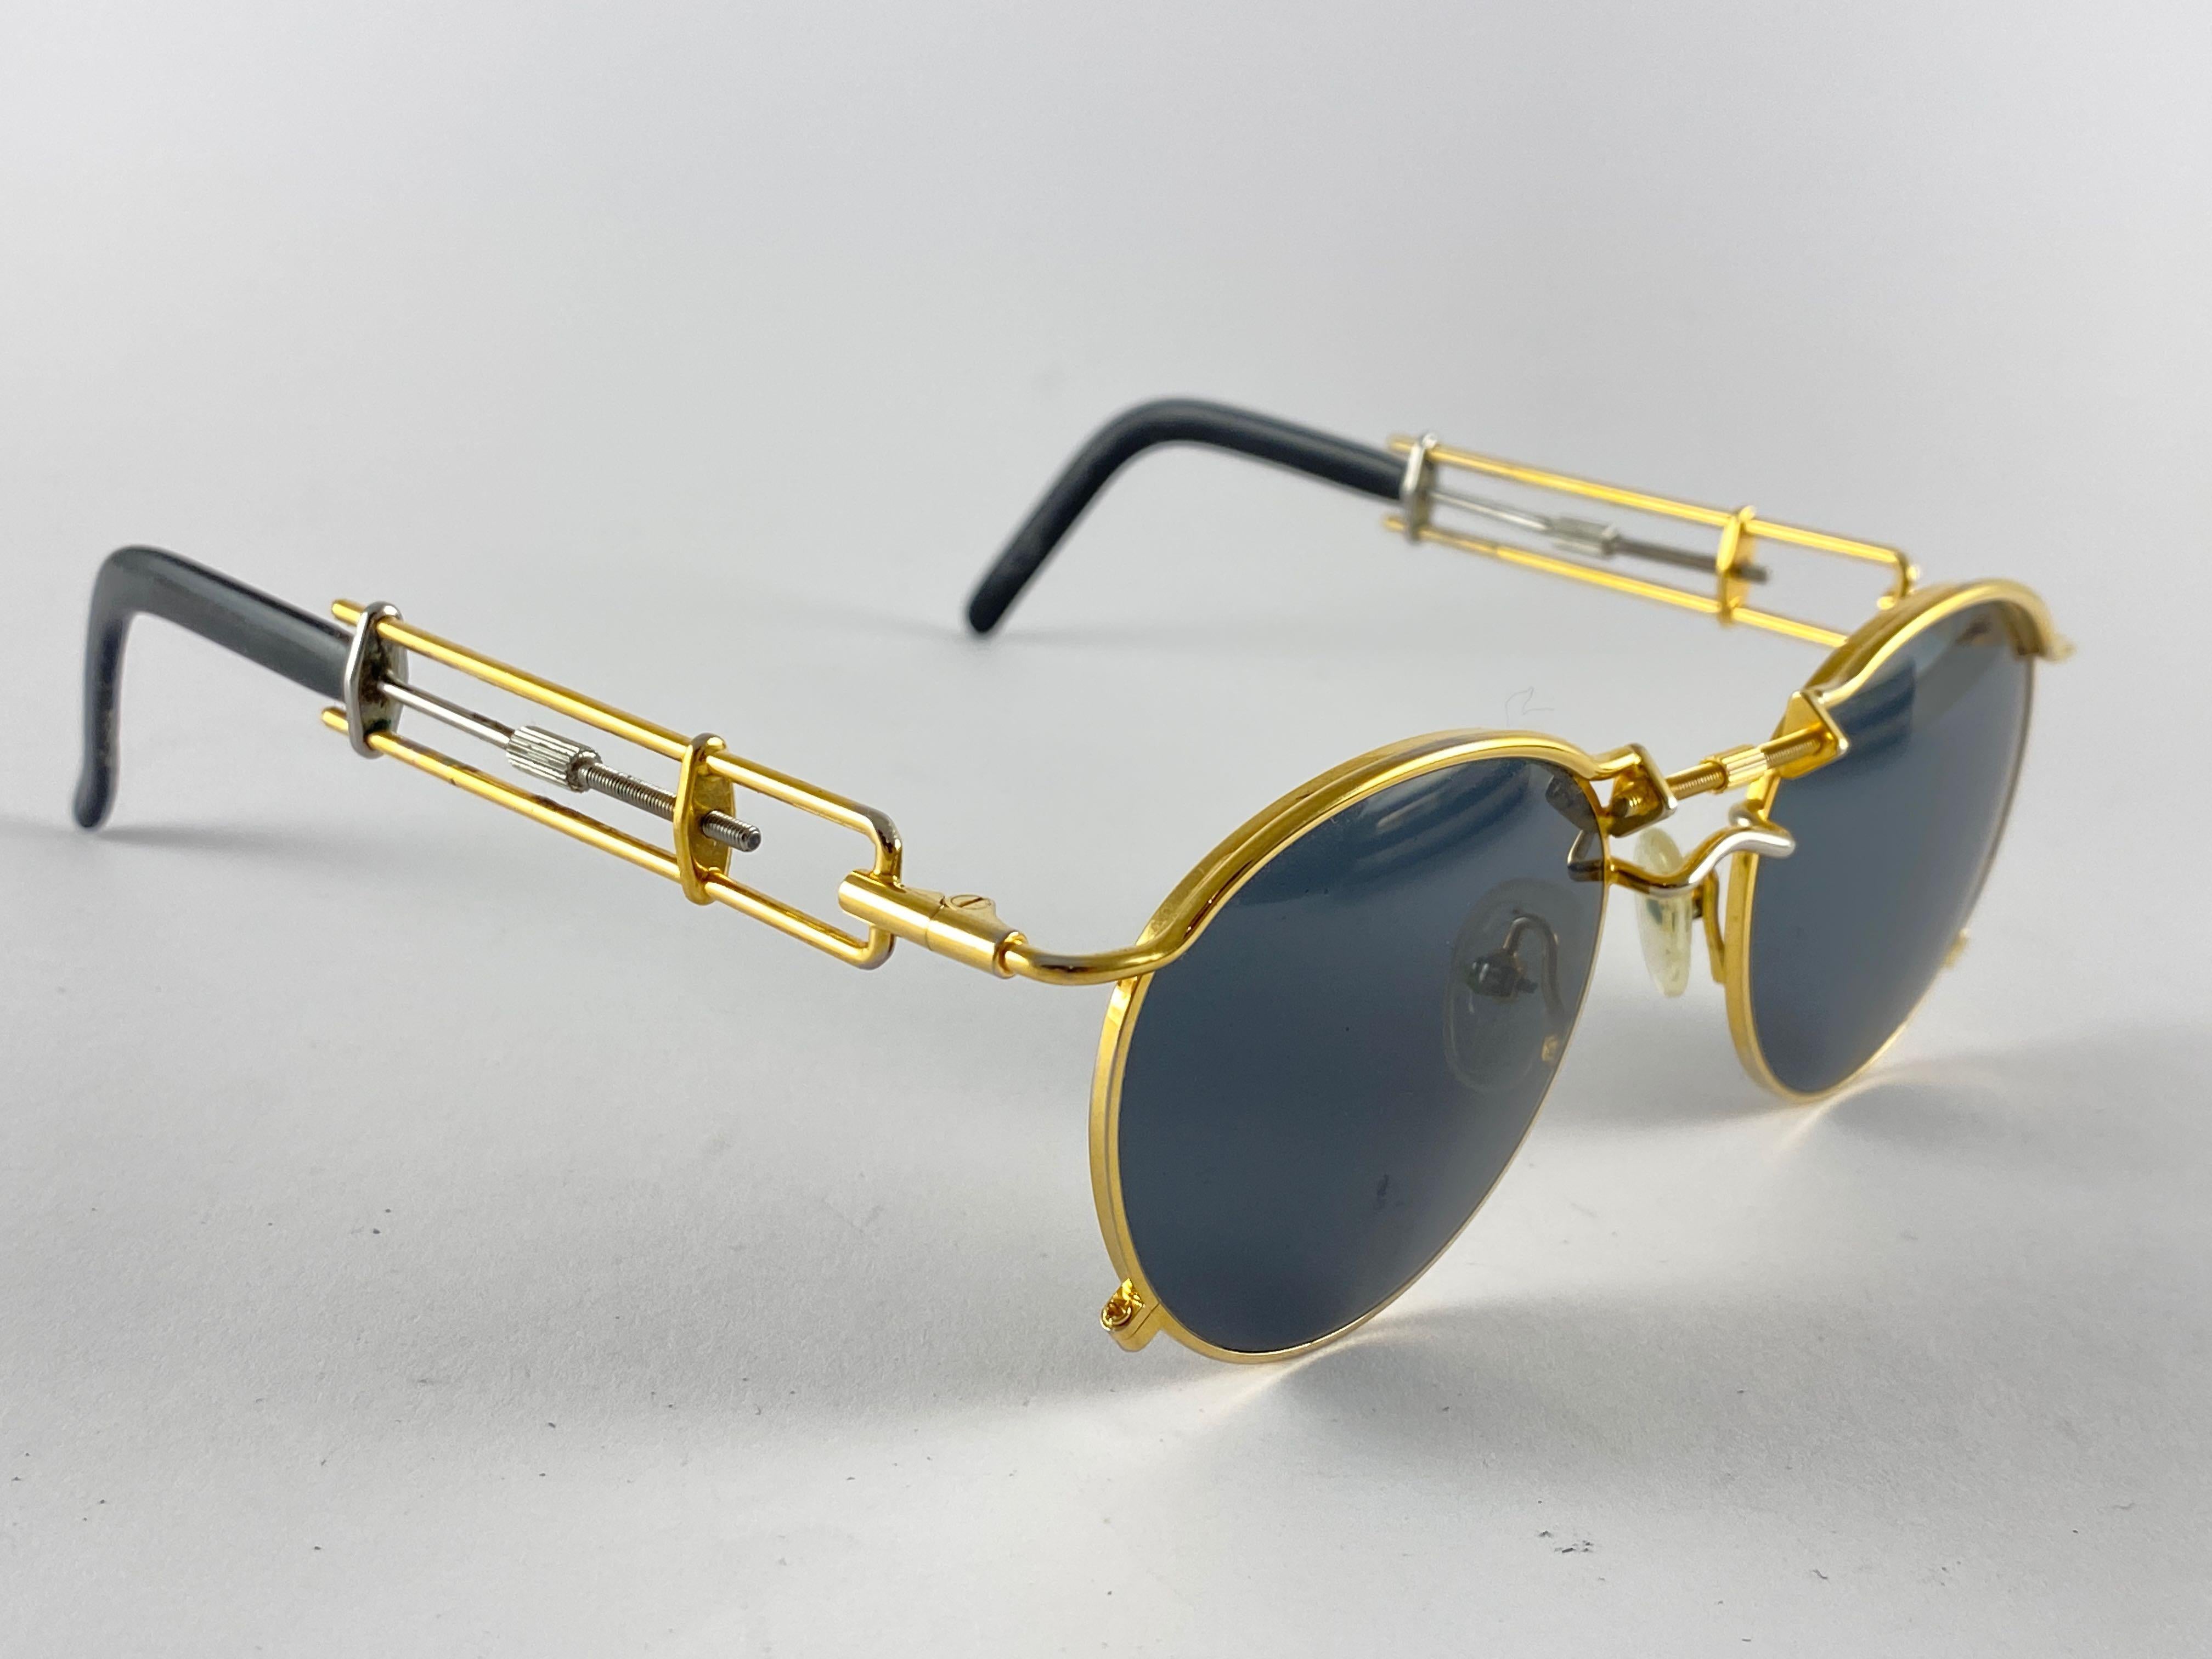 Vintage Jean Paul Gaultier 56 0174 Gold and Silver Details frame. 
Dark grey lenses that complete a ready to wear JPG look.

Amazing design with strong yet intricate details.
This item has visible sign of wear on the black acetate at the end of the